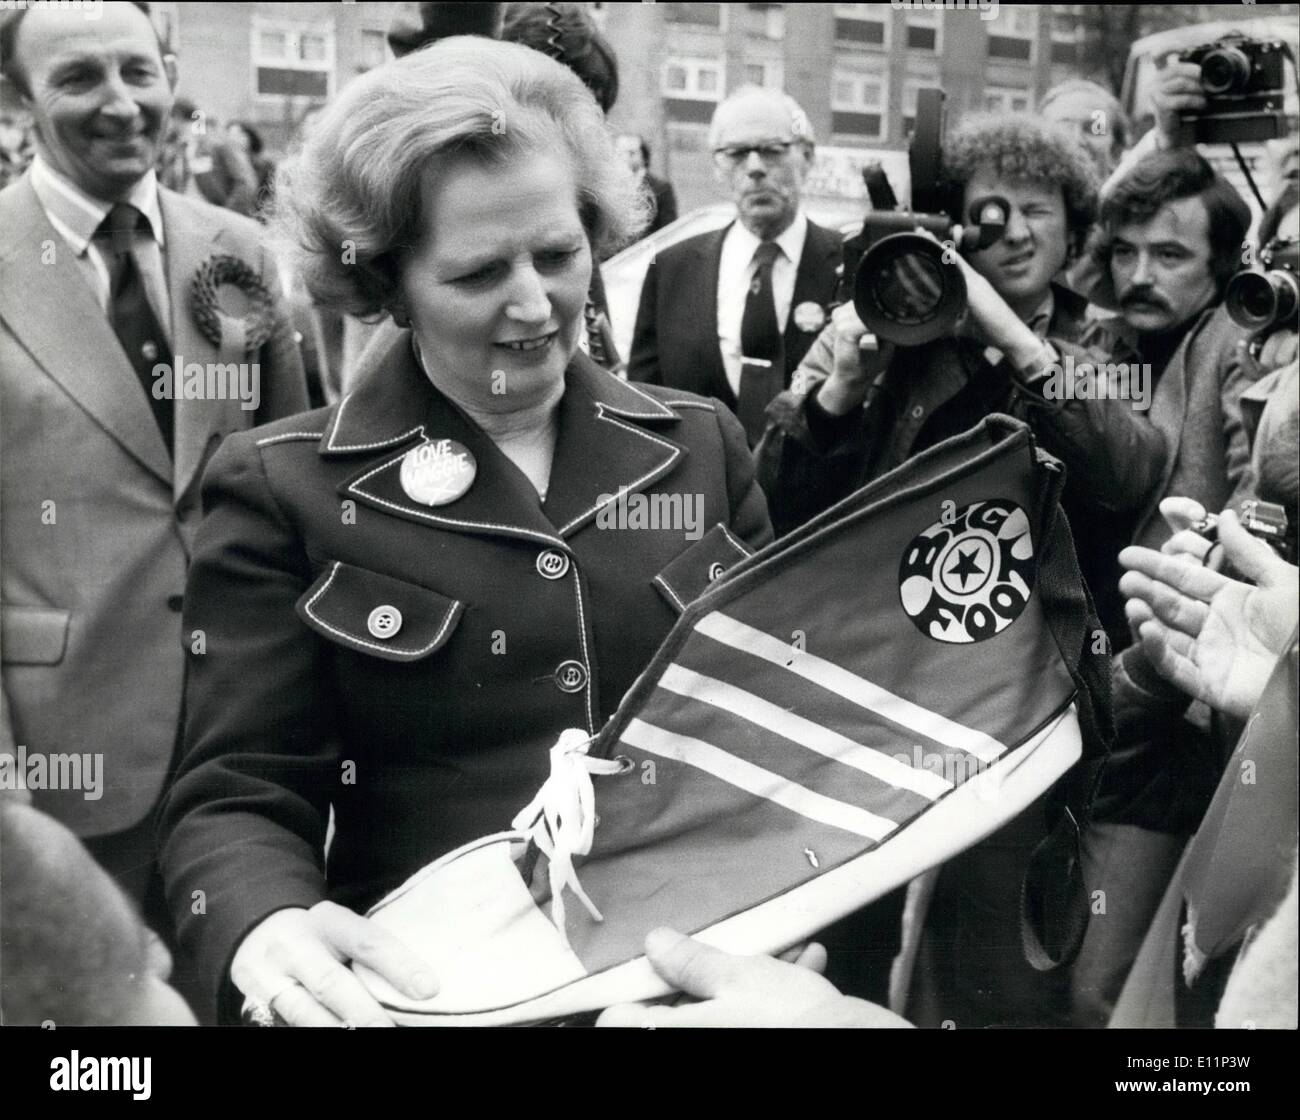 May 05, 1979 - Mrs. Thatcher Is Given The Boot: Mrs. Margaret Thatcher is handed a large boot during her visit to the Conservative Party Committee Rooms in Lewisham, South london this afternoon-it was given to her by the Tory Candidate for Lewisham West Mr. kemp, it is to kick Jim Callaghan out of office. Stock Photo